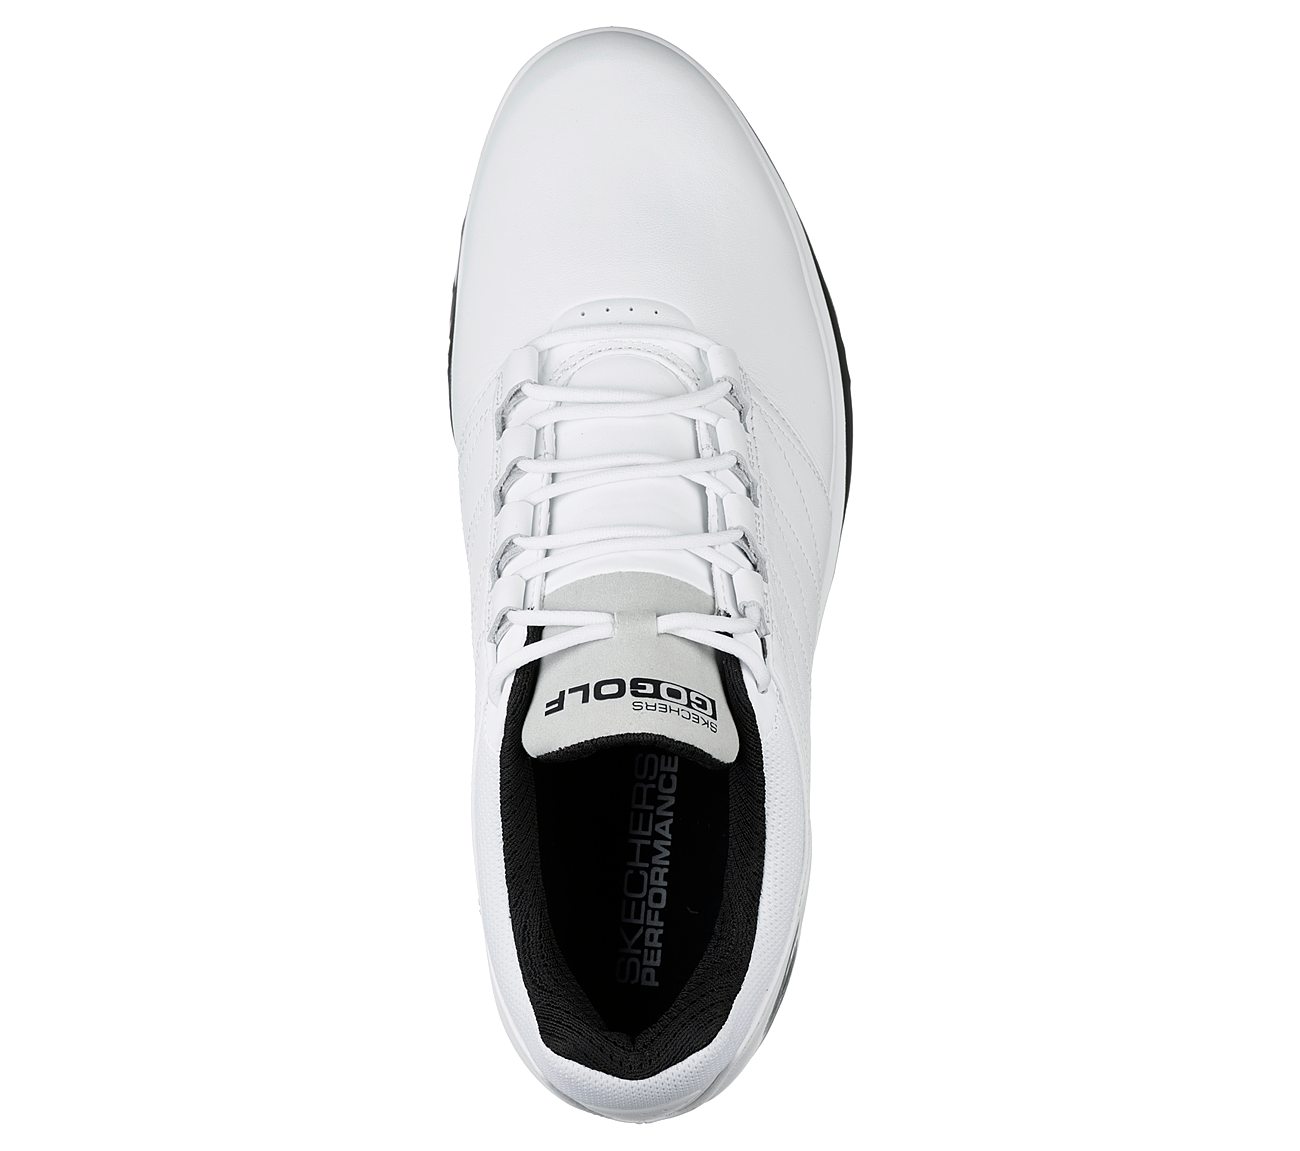 skechers golf shoes spikes